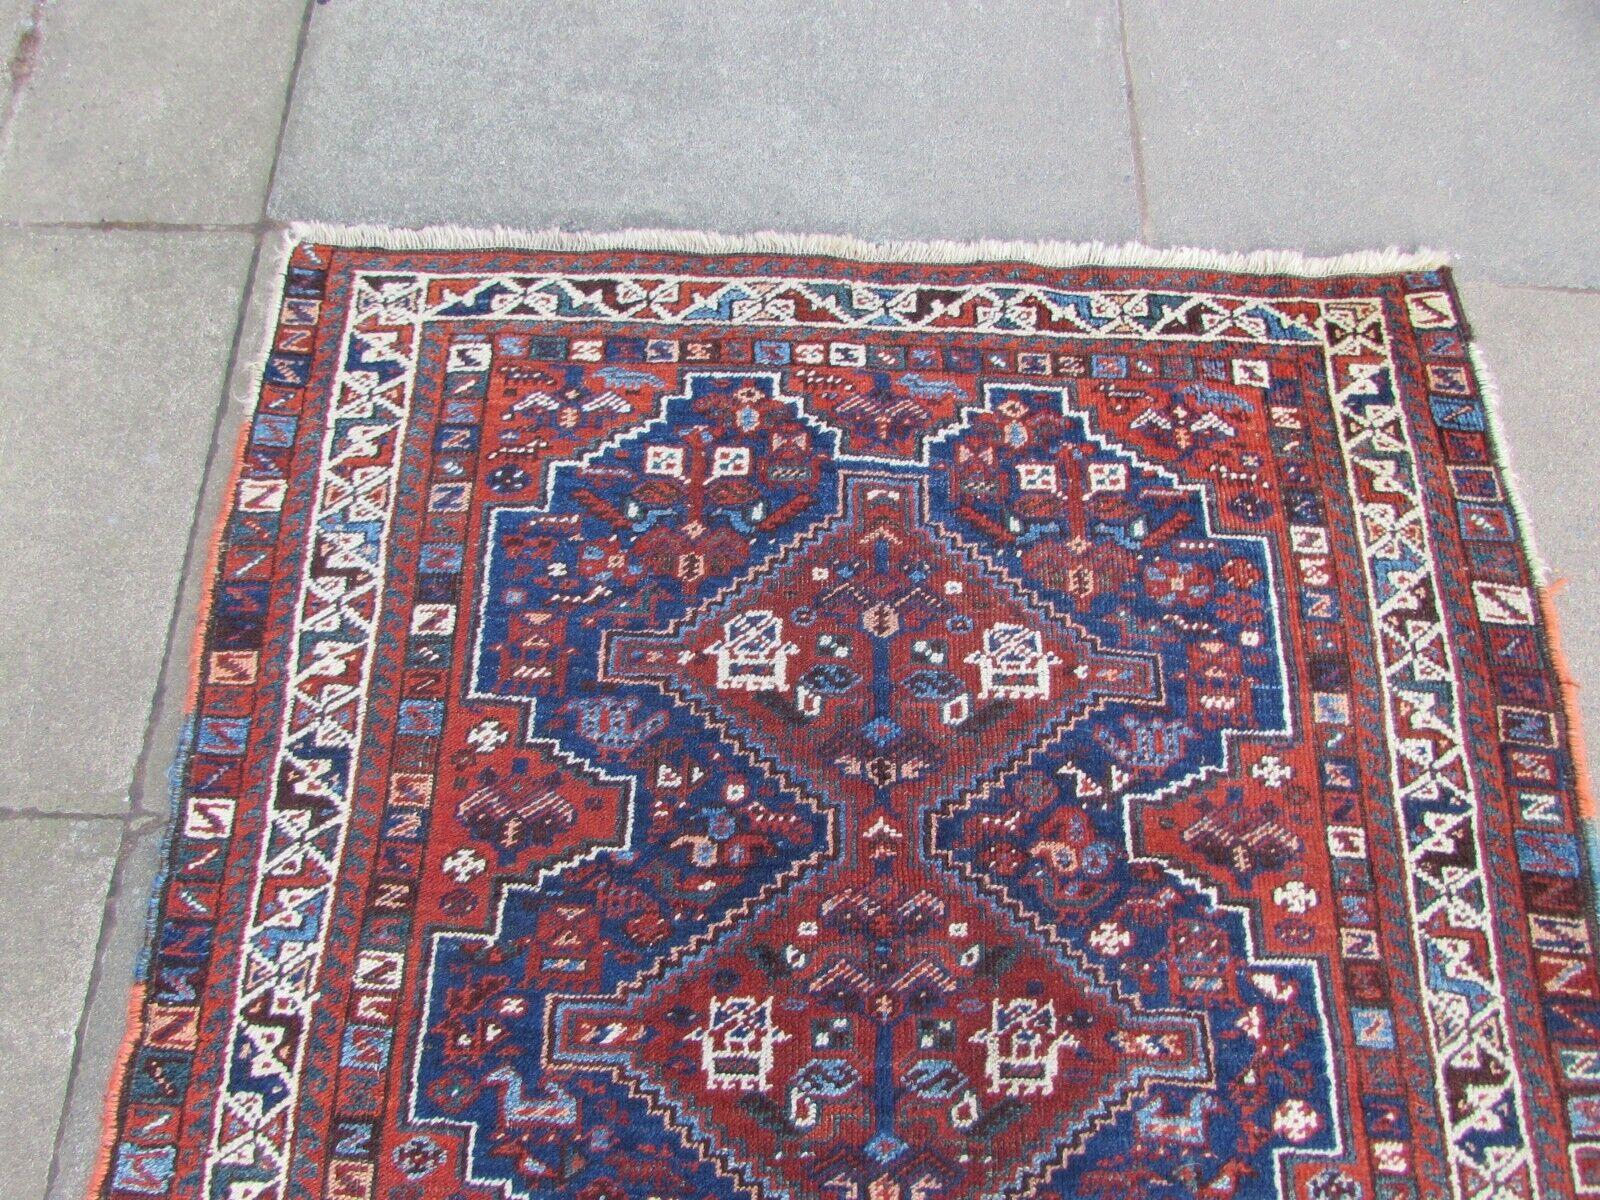 Handmade Antique Persian Style Shiraz Rug 3.9' x 4.9', 1920s, 1Q62 For Sale 3